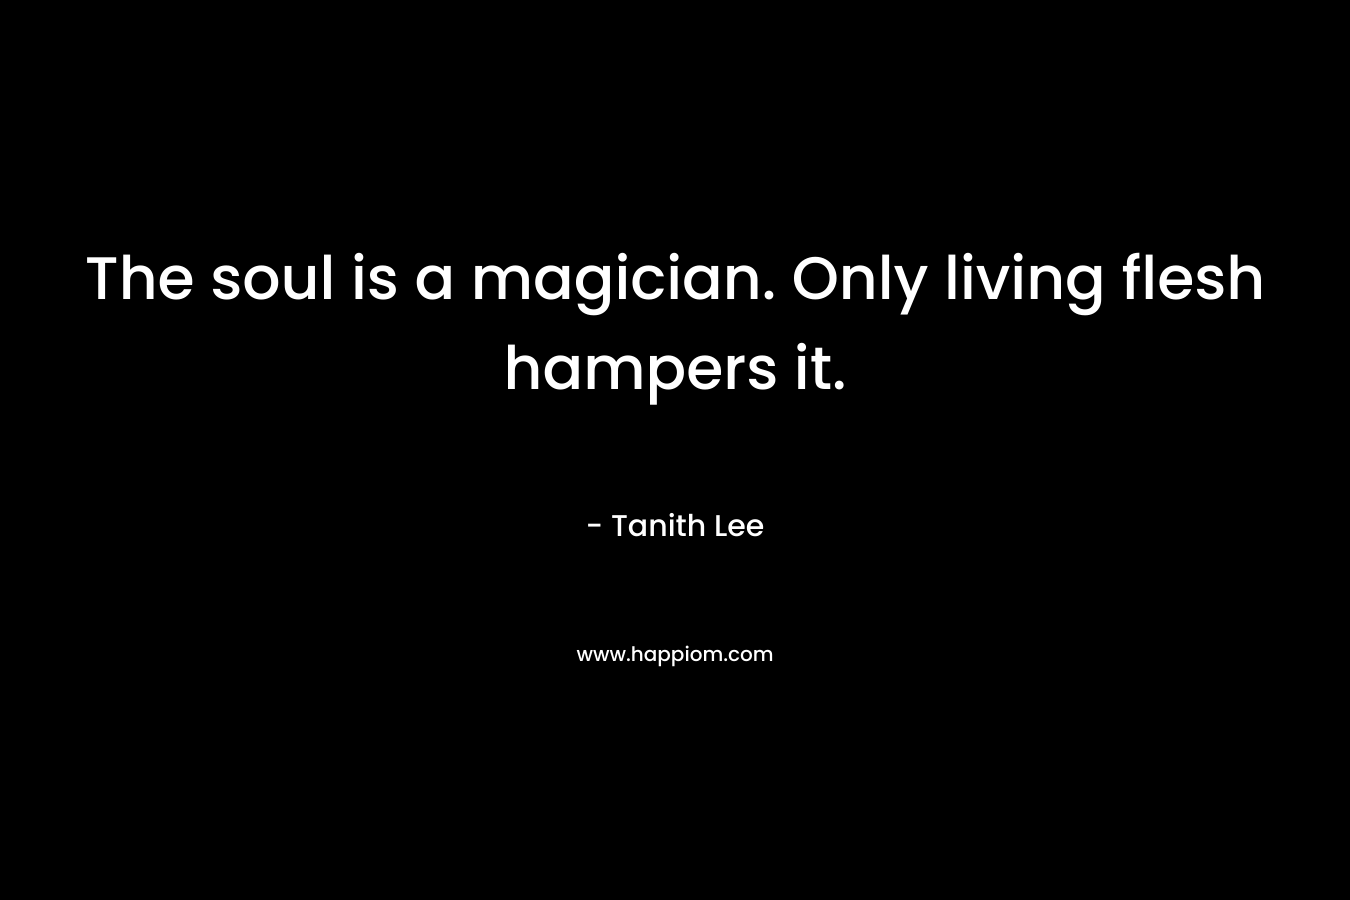 The soul is a magician. Only living flesh hampers it.